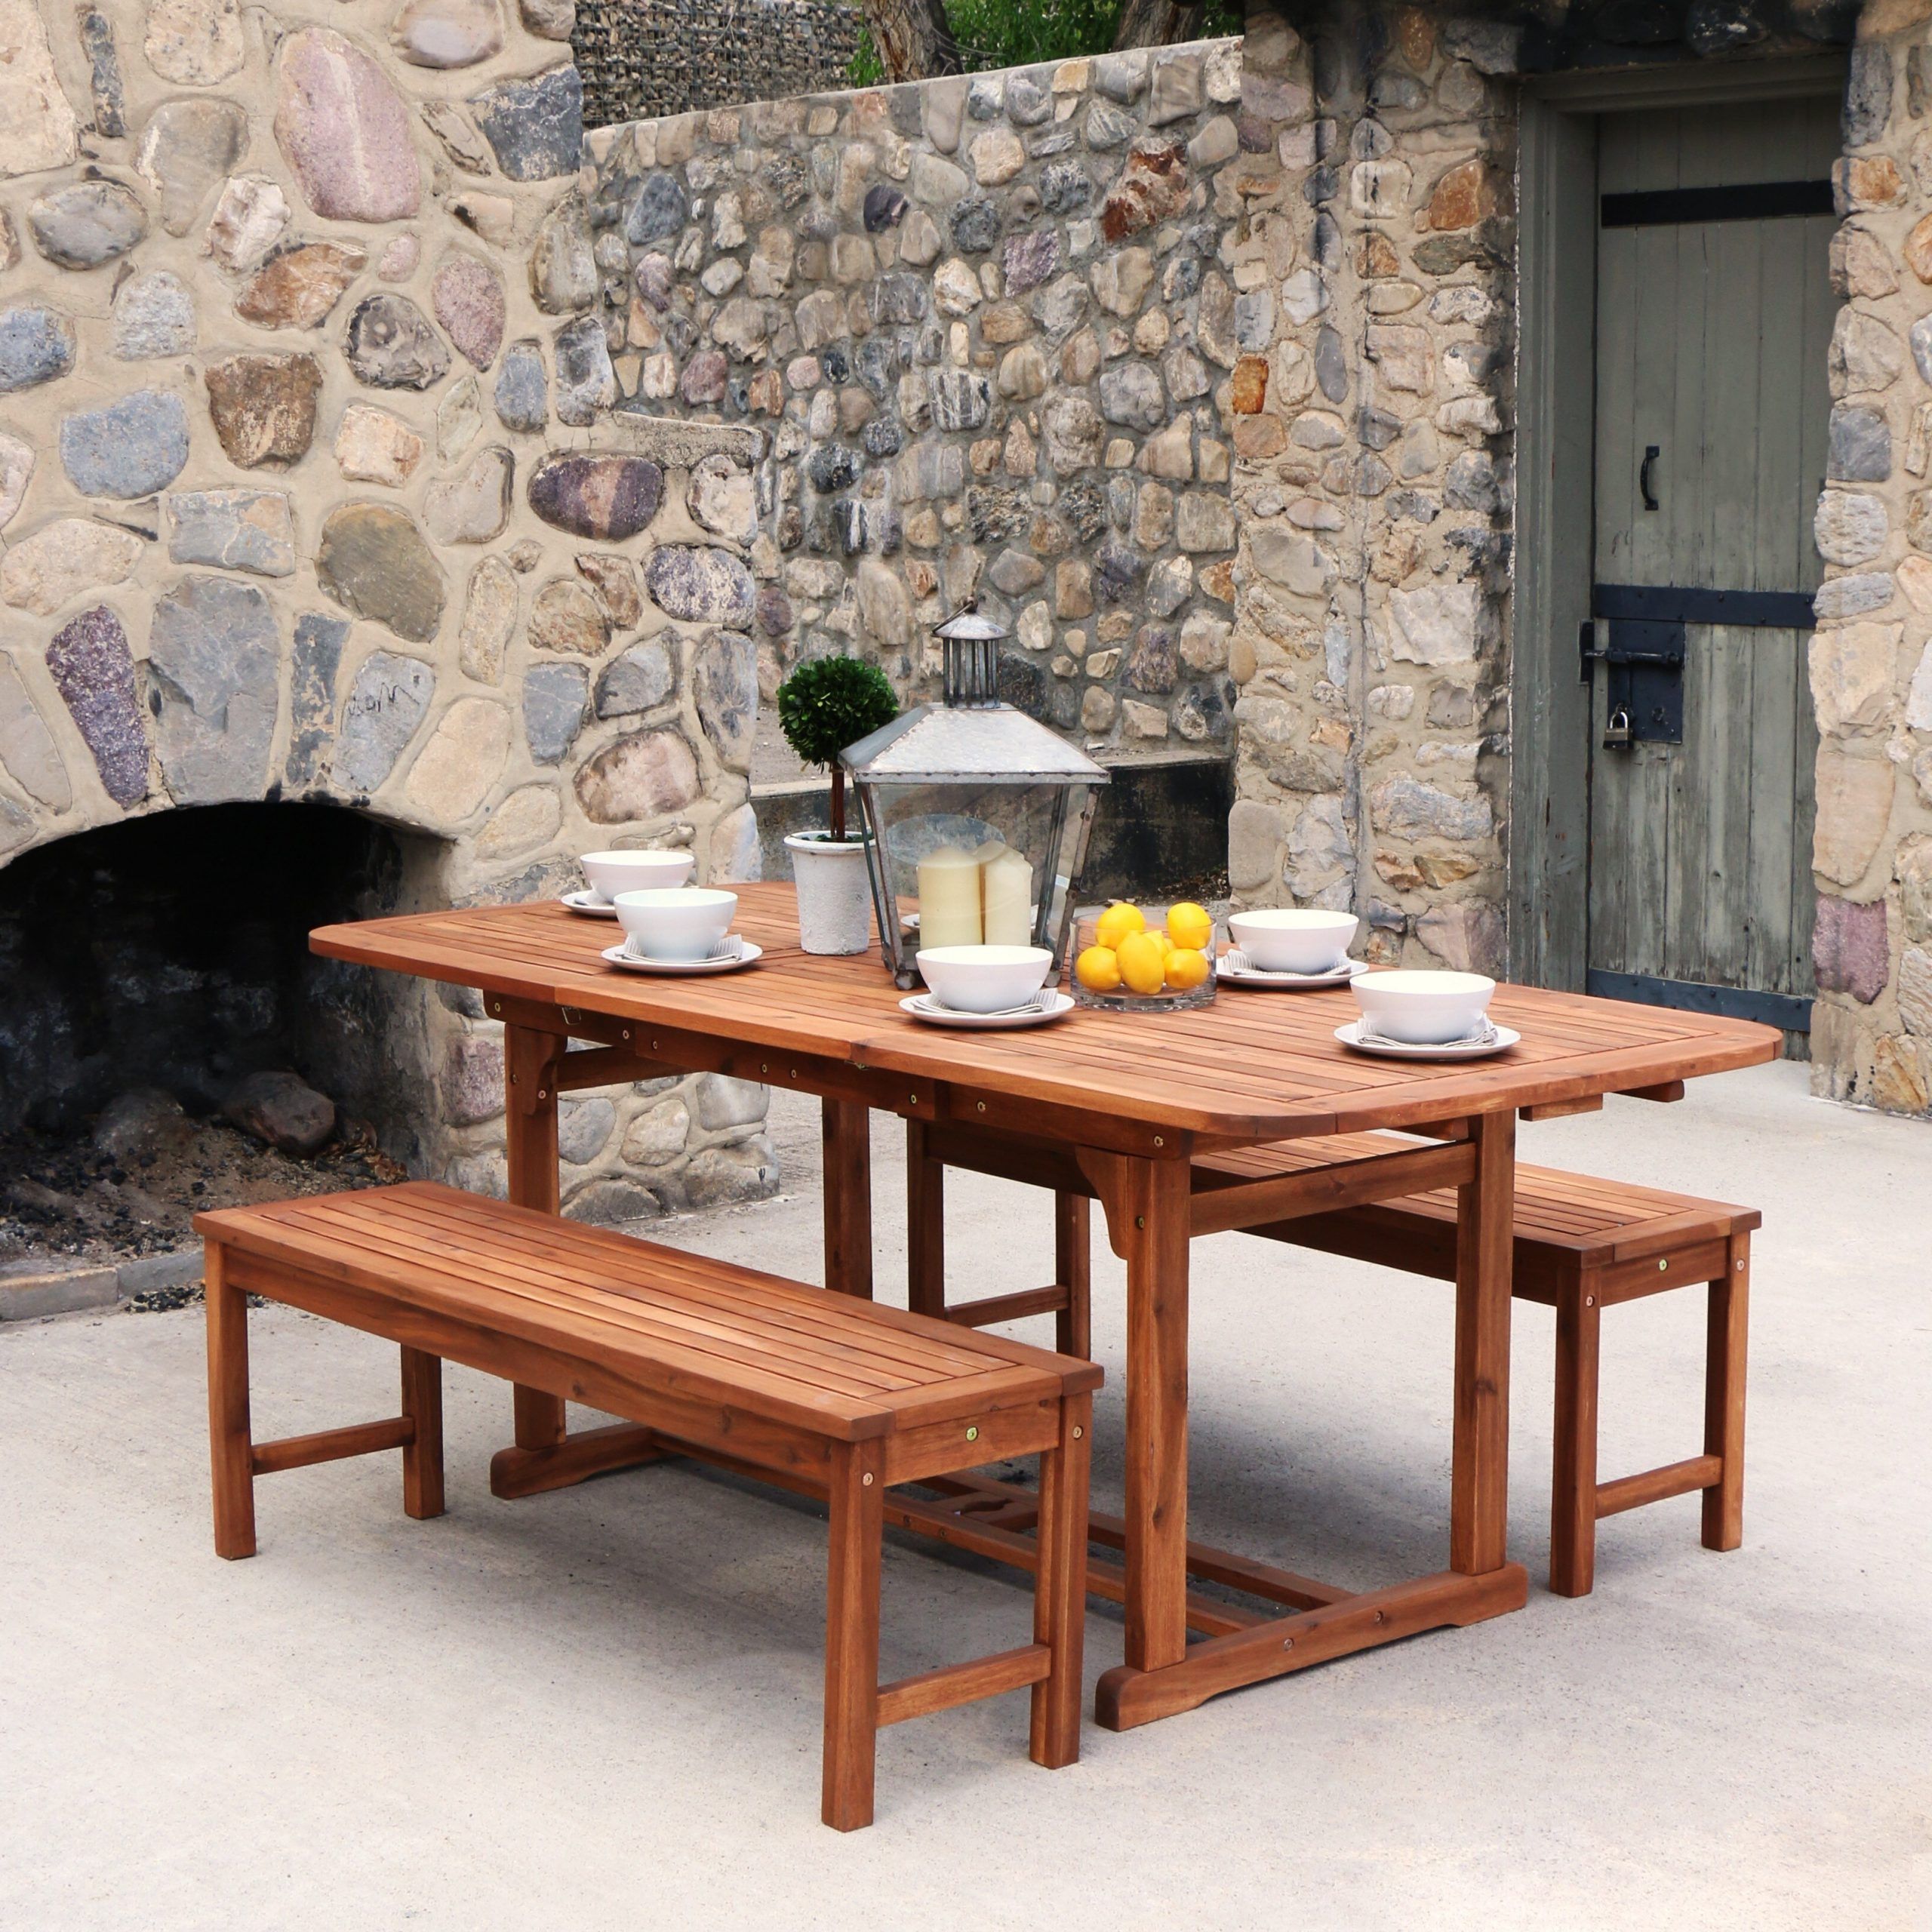 Shop 3 Piece Brown Acacia Patio Dining Set – Free Shipping On Orders Within Well Known Brown Acacia 6 Piece Patio Dining Sets (View 15 of 15)